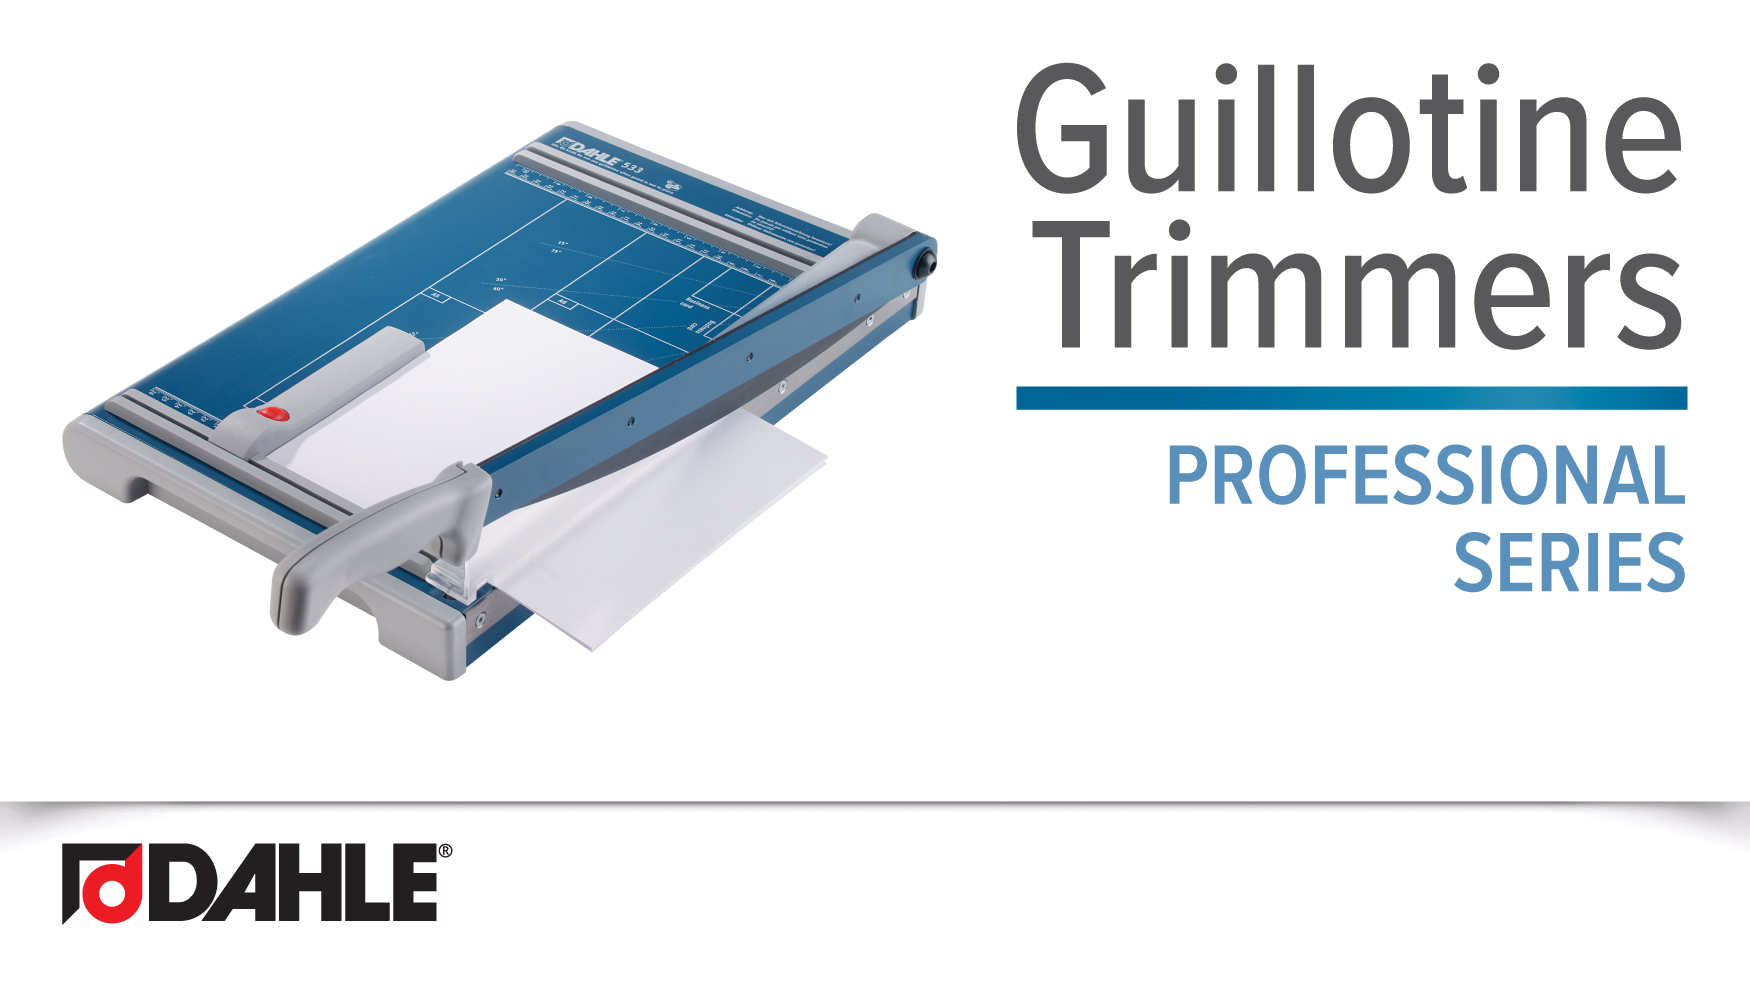 Dahle Professional Guillotine Trimmer Video